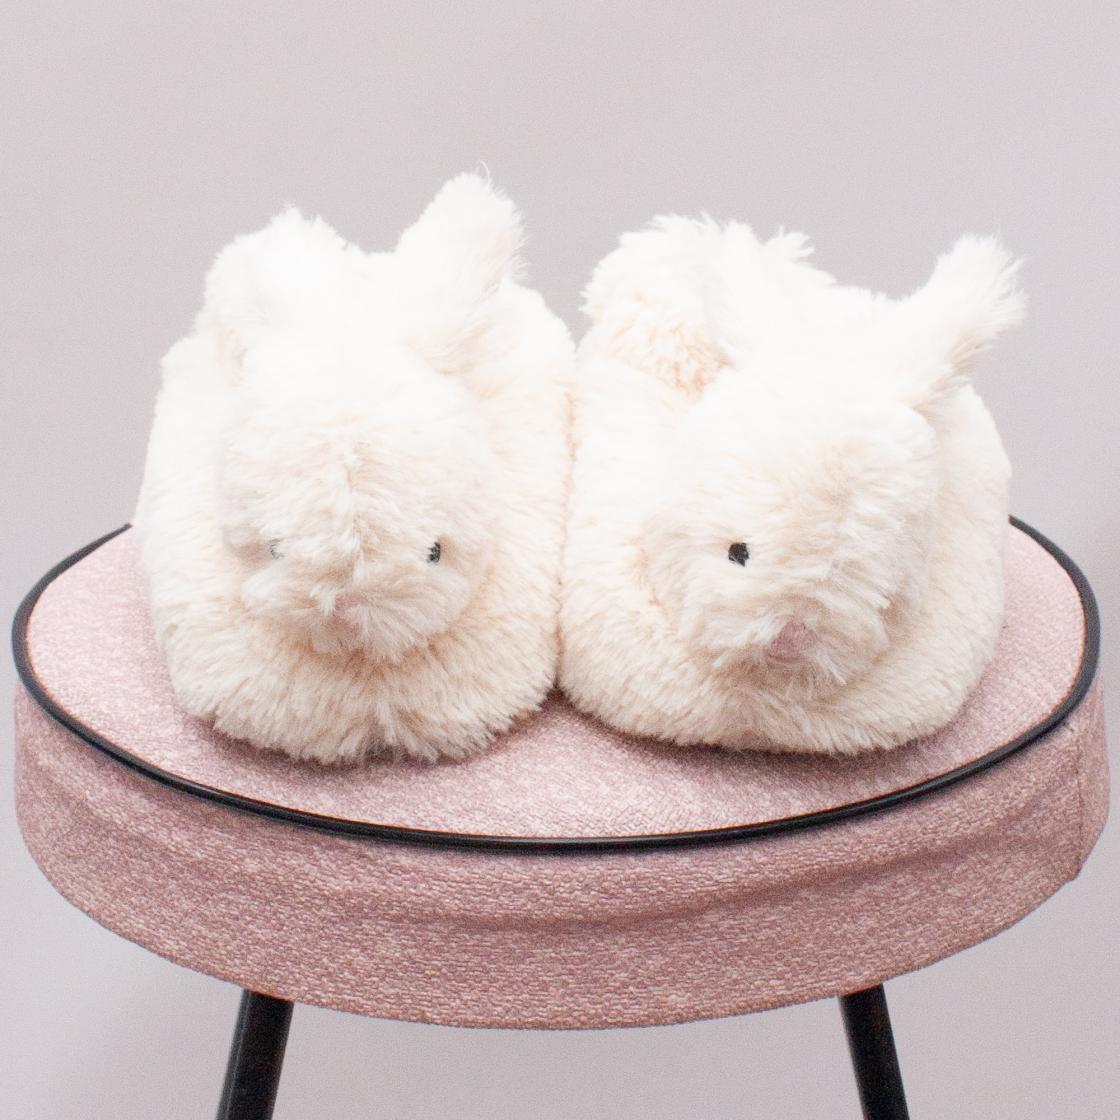 Peter Alexander Bunny Slippers - (Age 1-2 approx.)